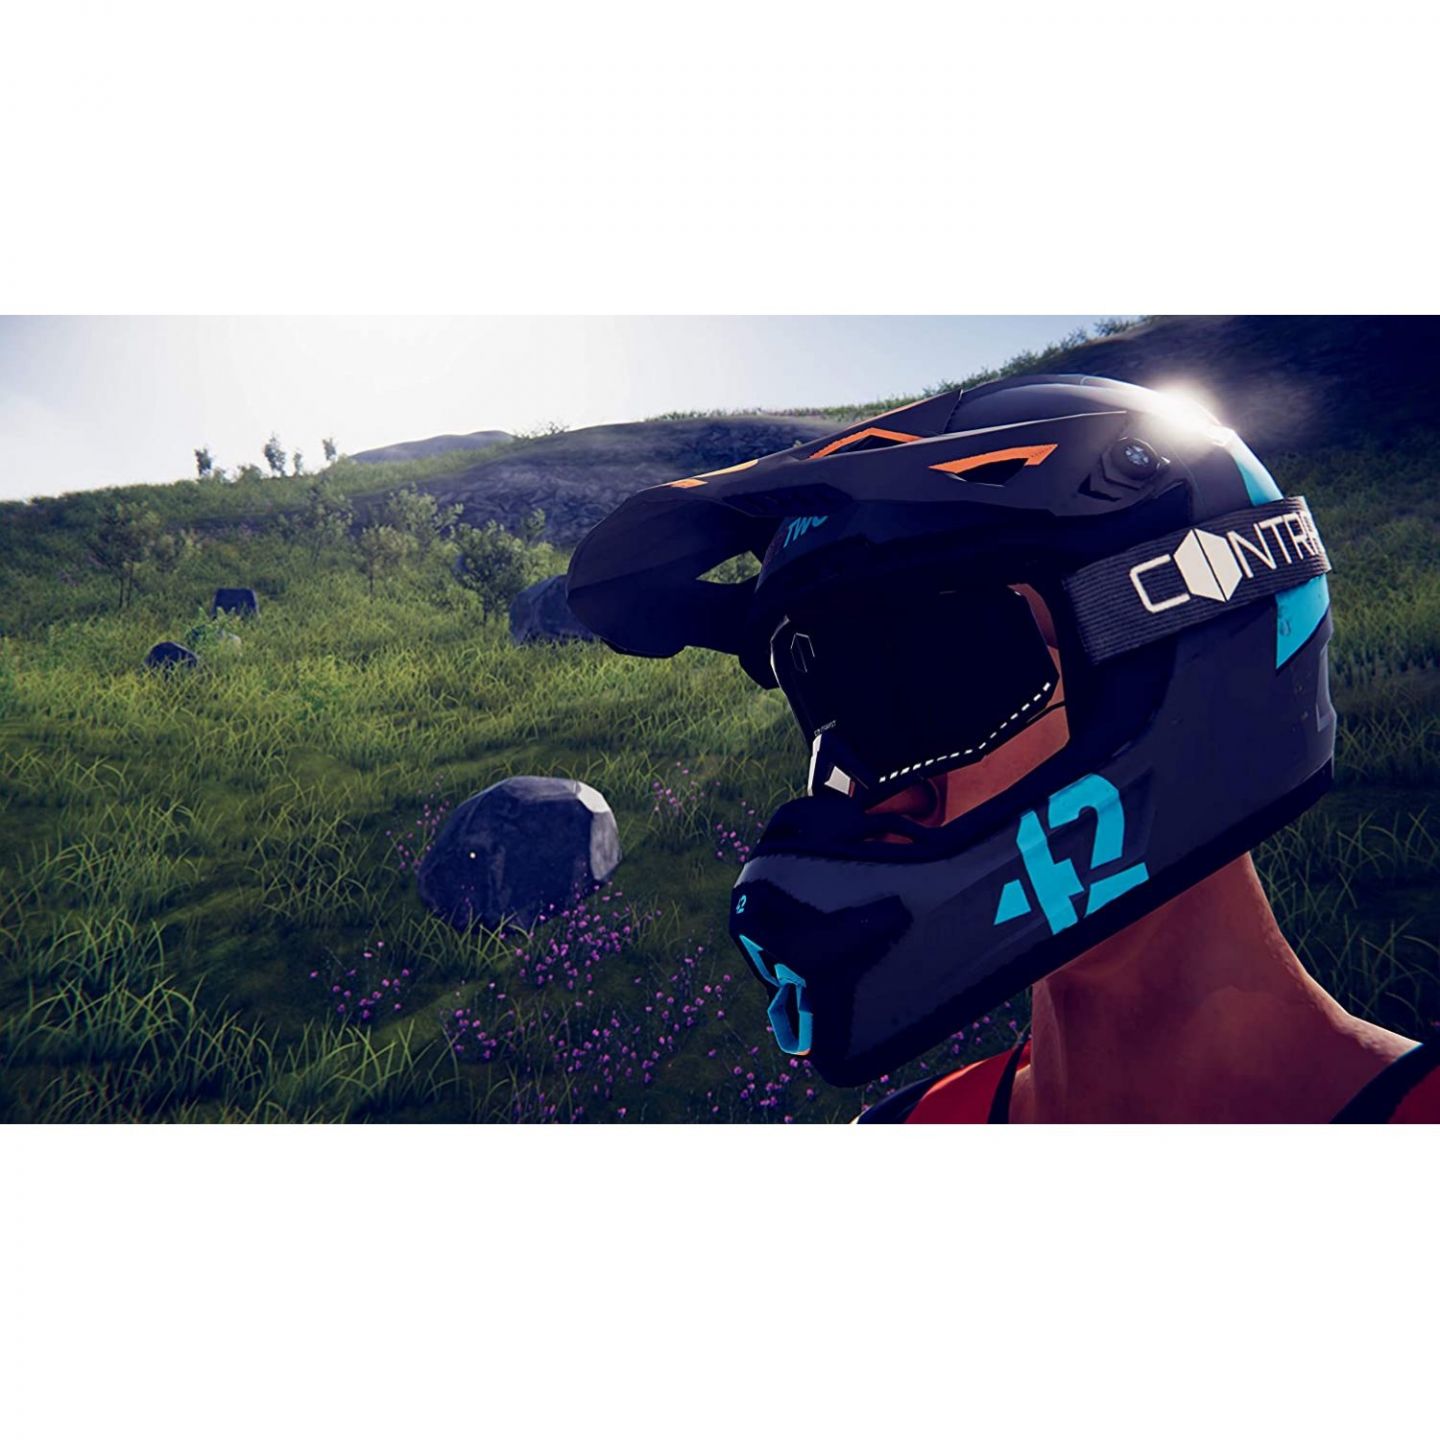 Game 4 Source Descenders Playstation PS4 Entertainment